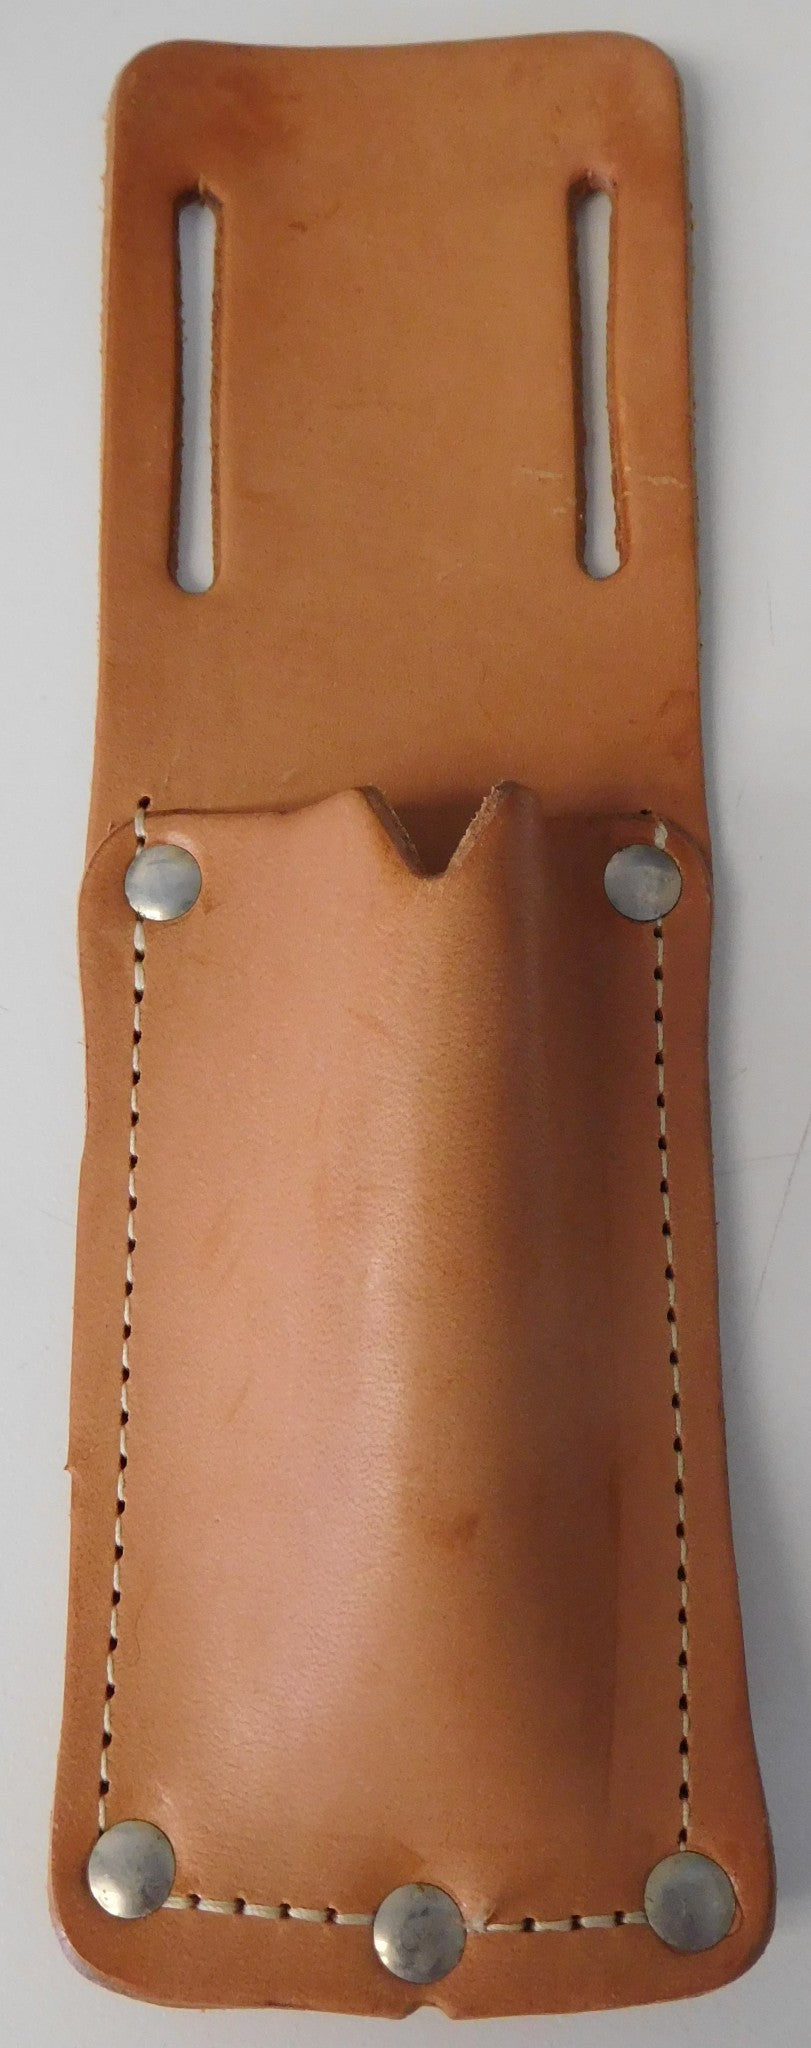 Unbranded 7-3/4" x 2-1/4" Leather Knife Pouch Tool Holder Made in the USA